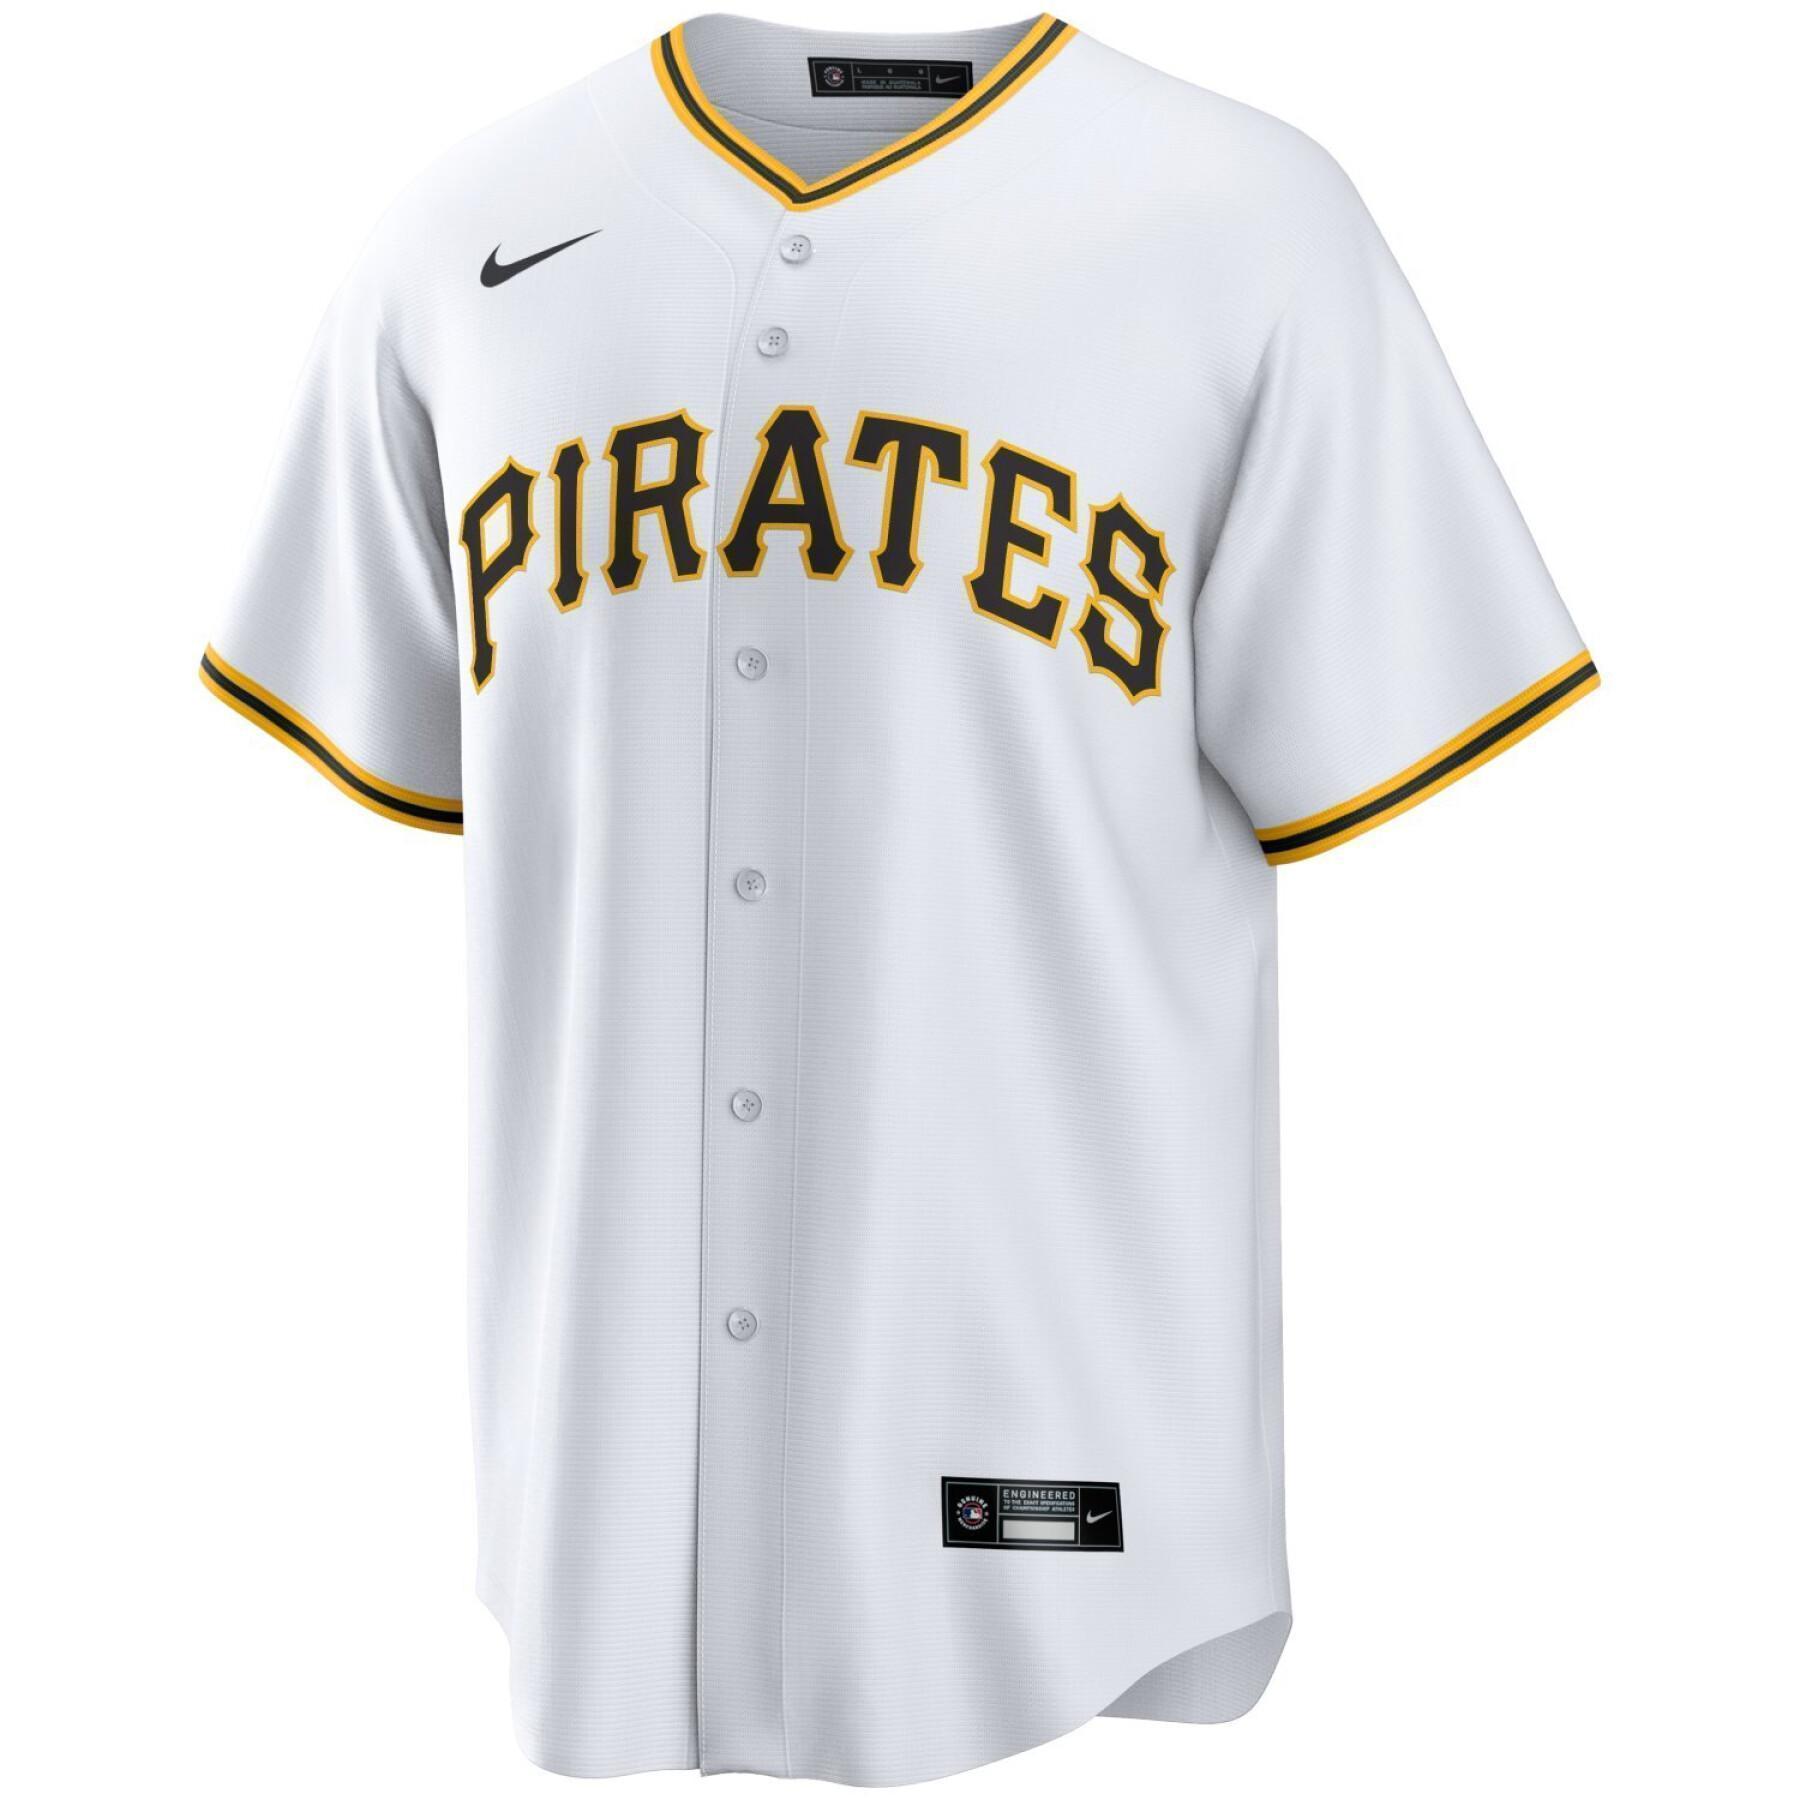 Home jersey Pirates